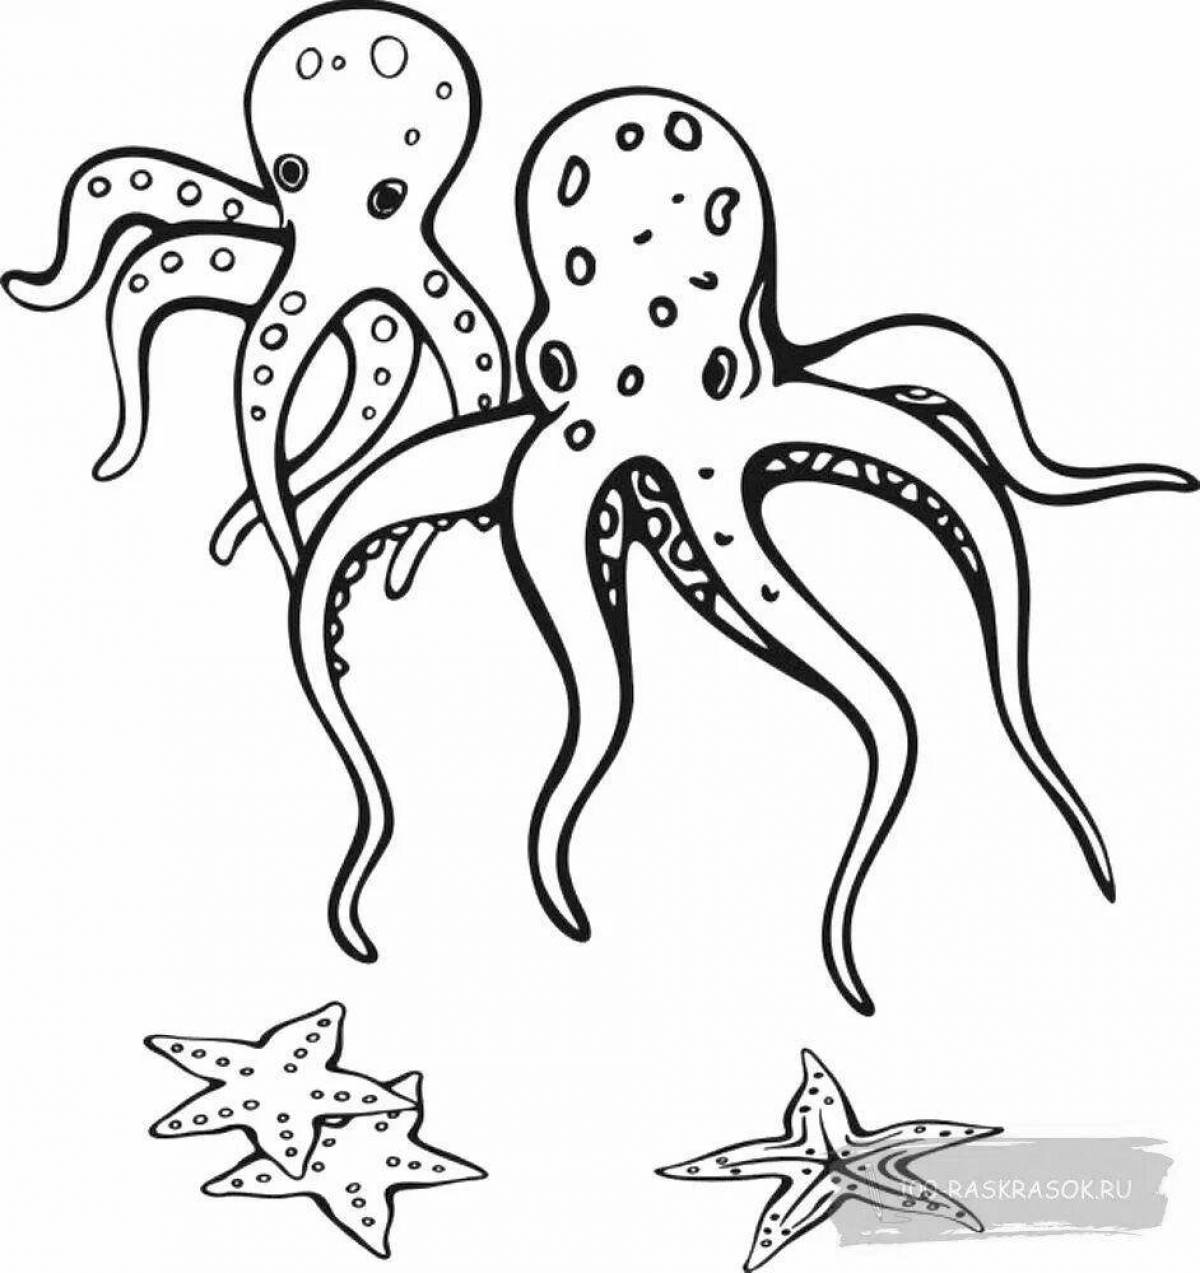 Adorable sea animal coloring page for kids